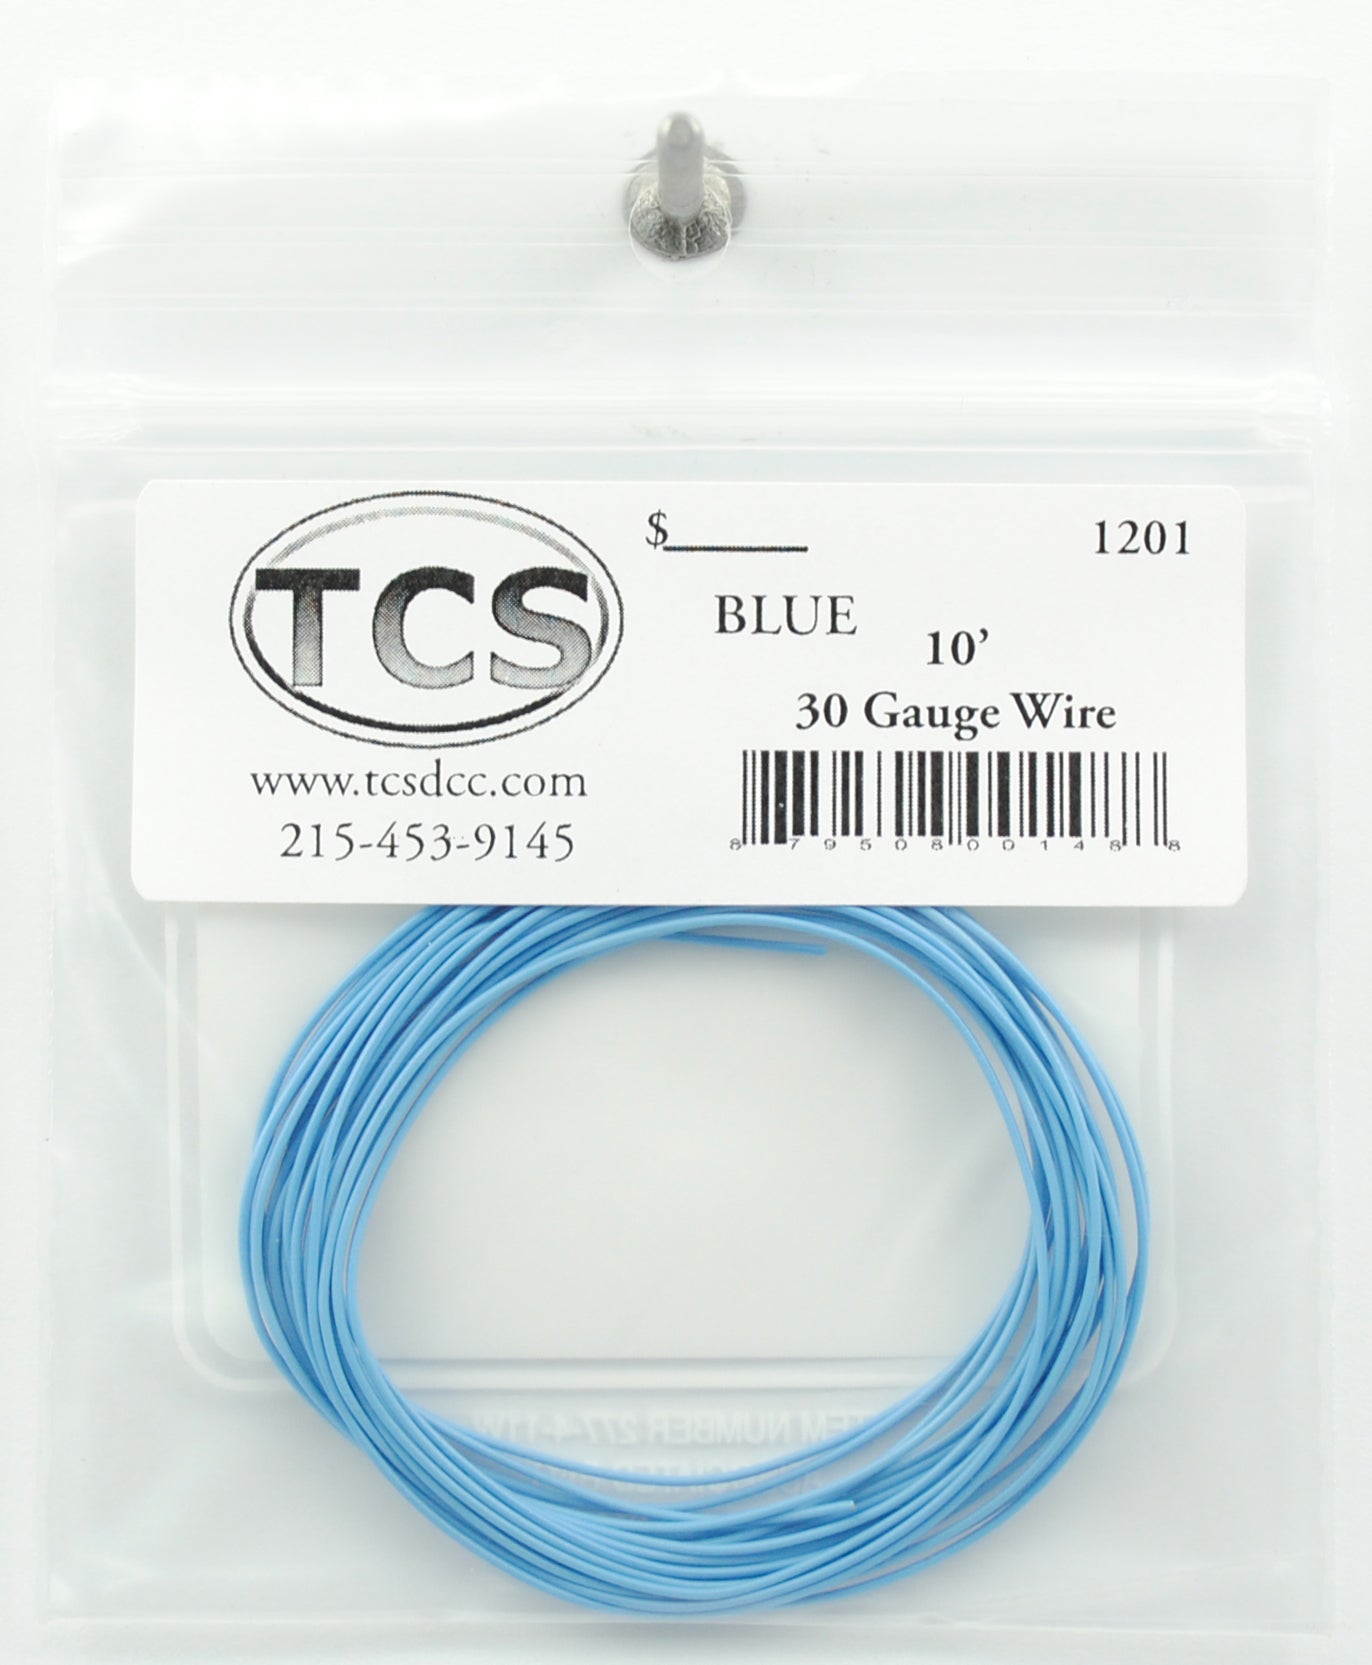 Train Control Systems 1201 10' of 30 Gauge Wire, Blue